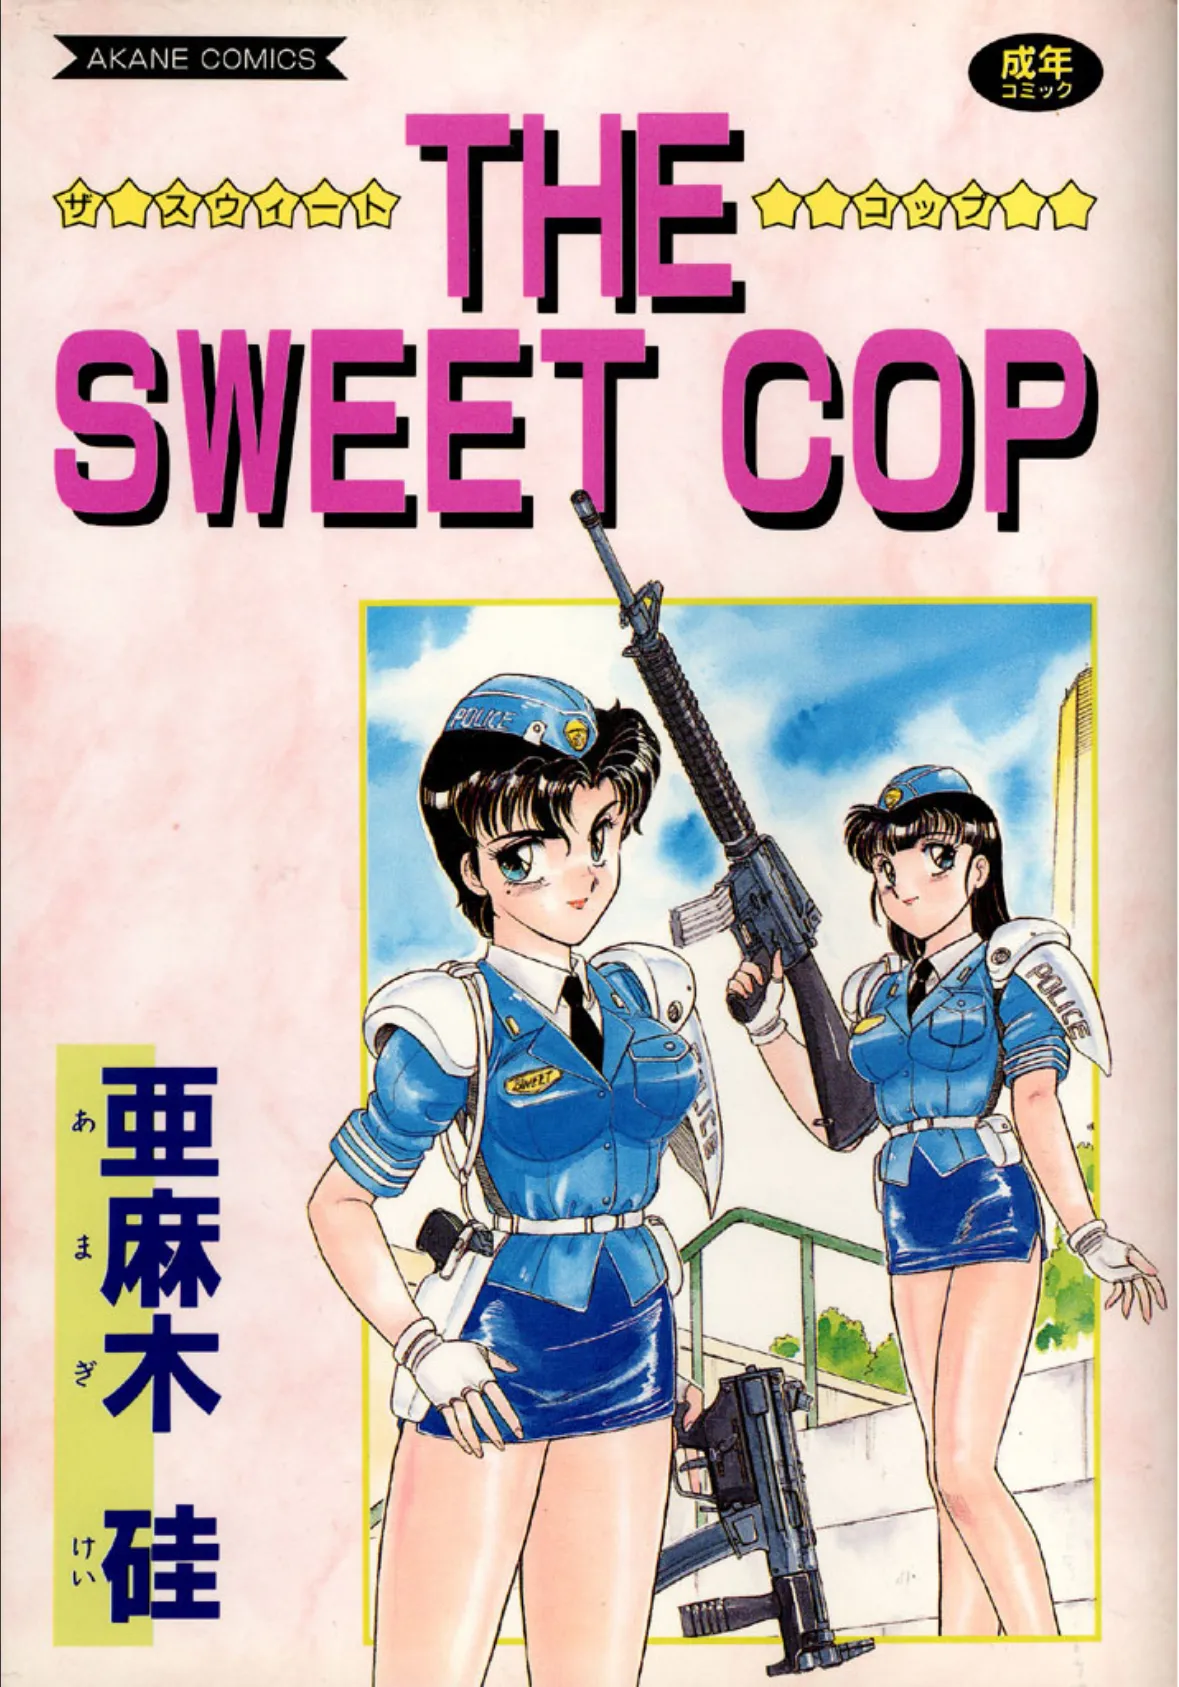 THE SWEET COP